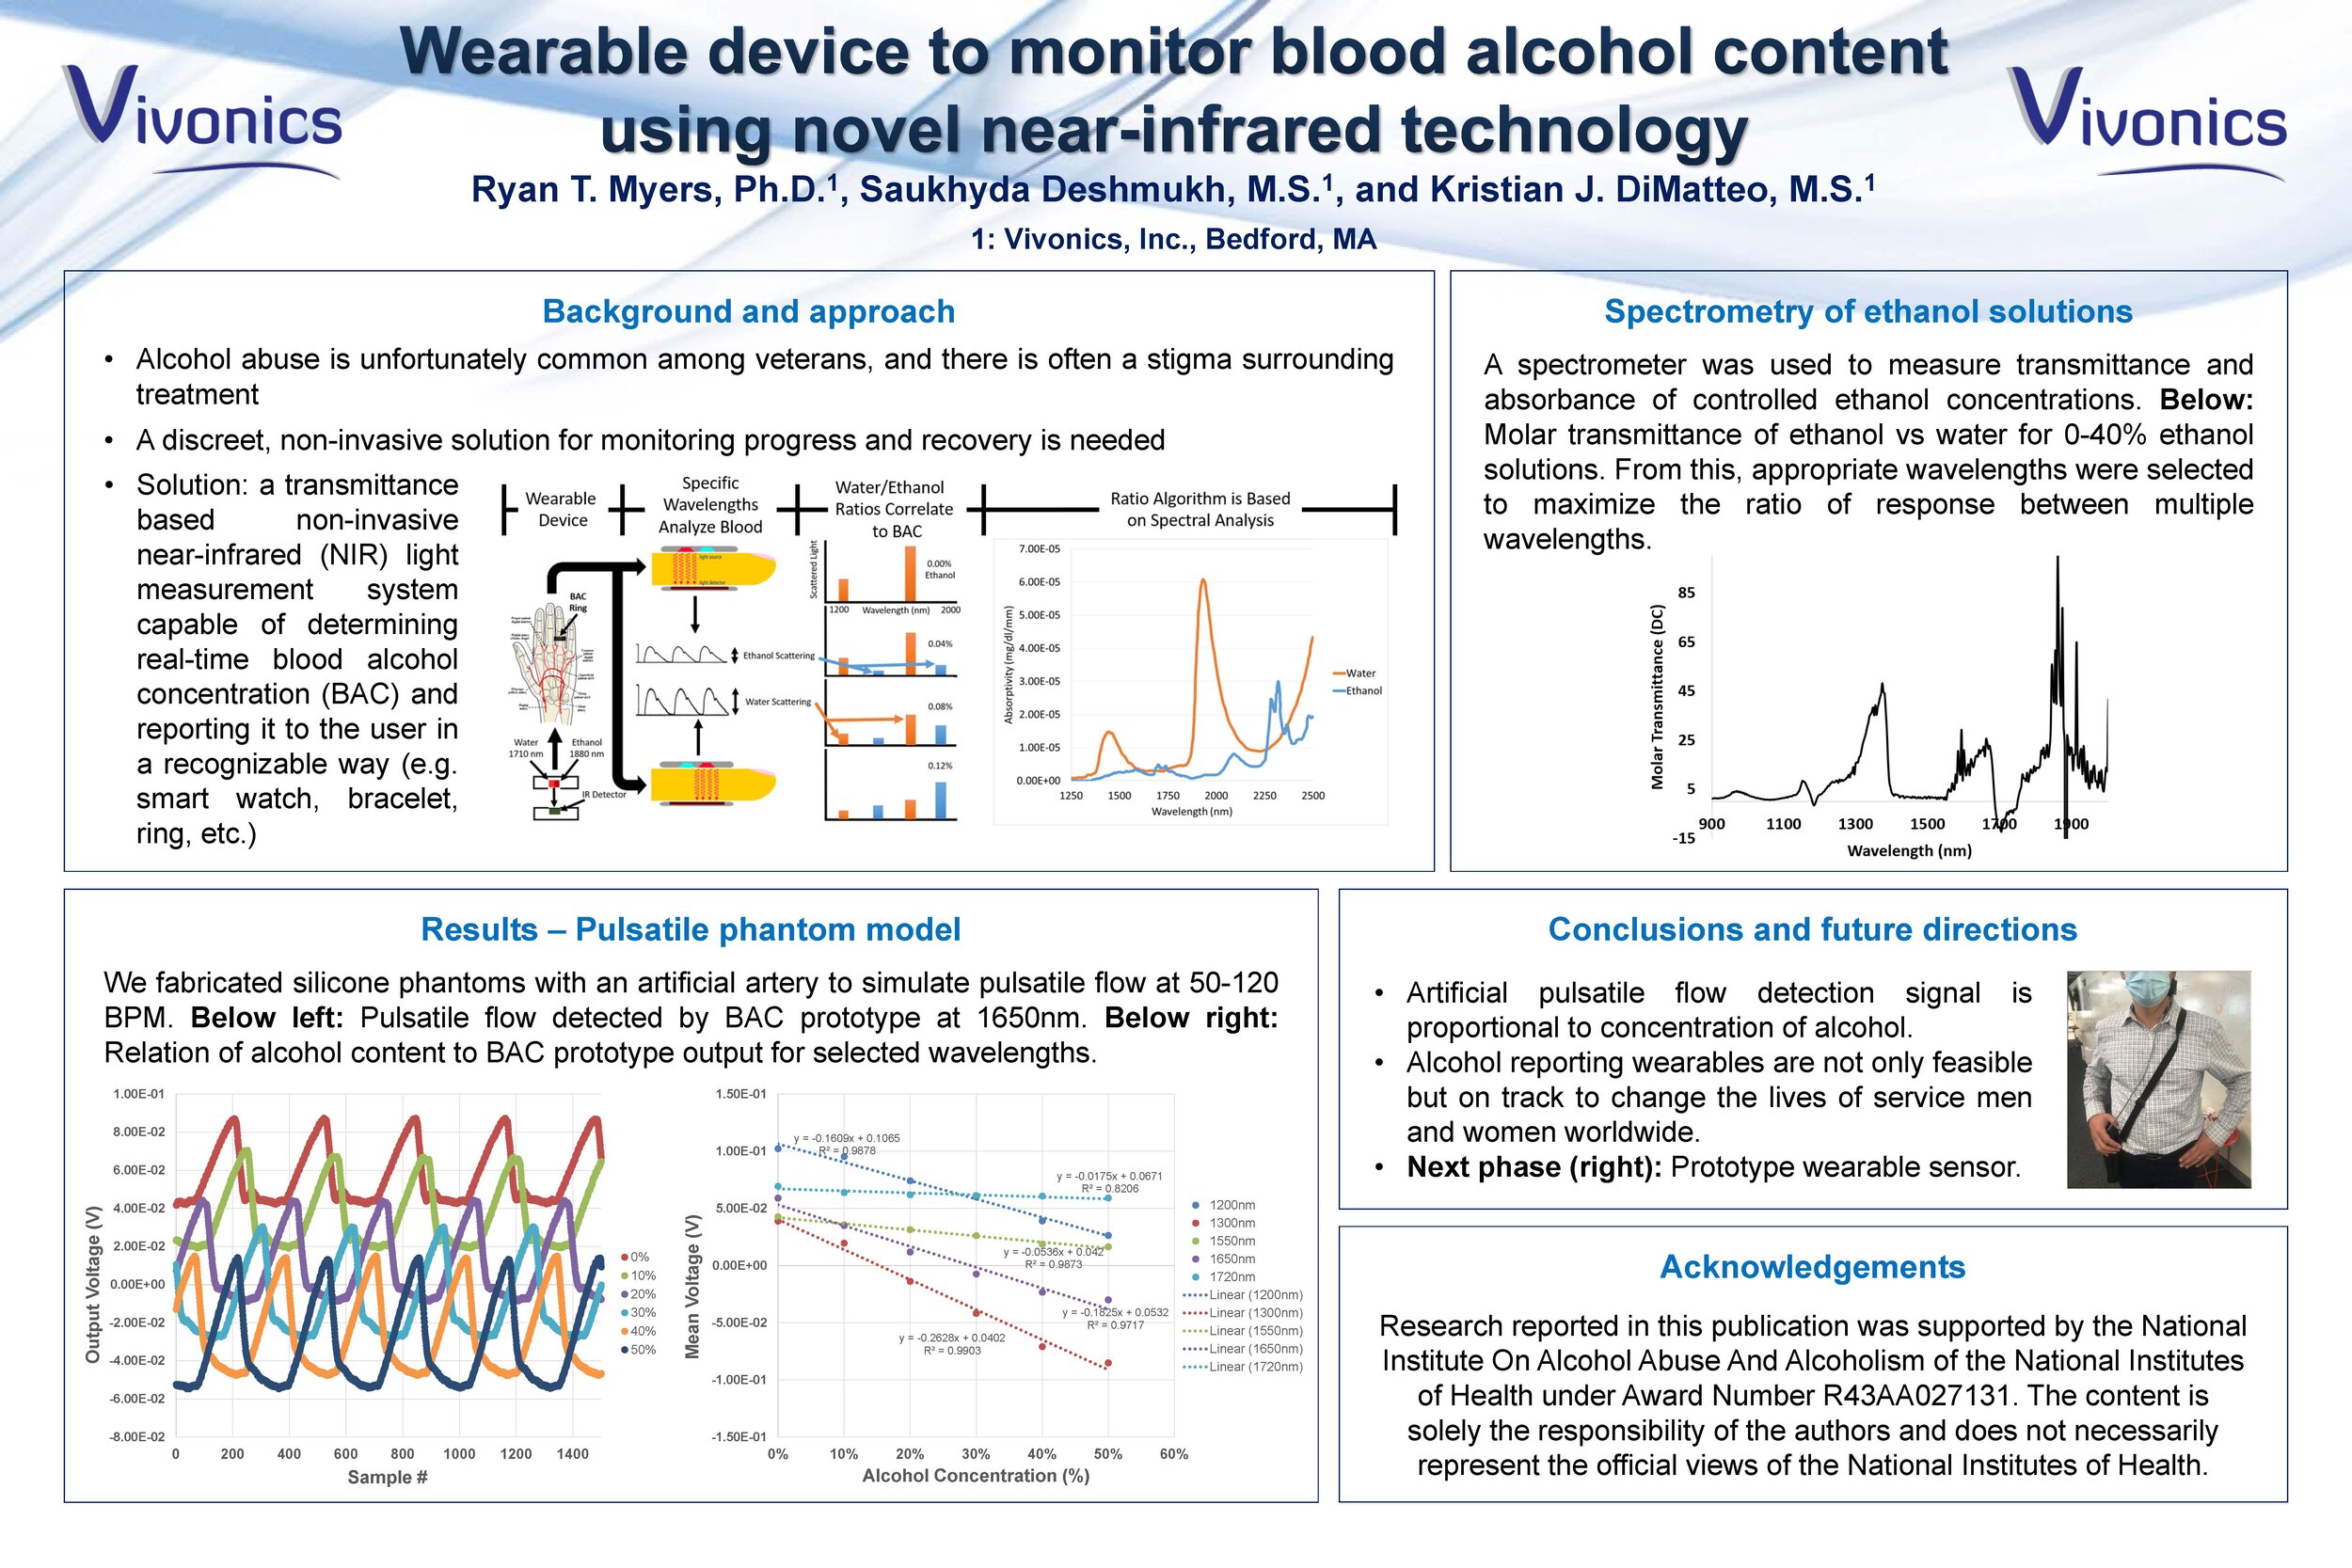 Wearable device to monitor blood alcohol content using novel near-infrared technology